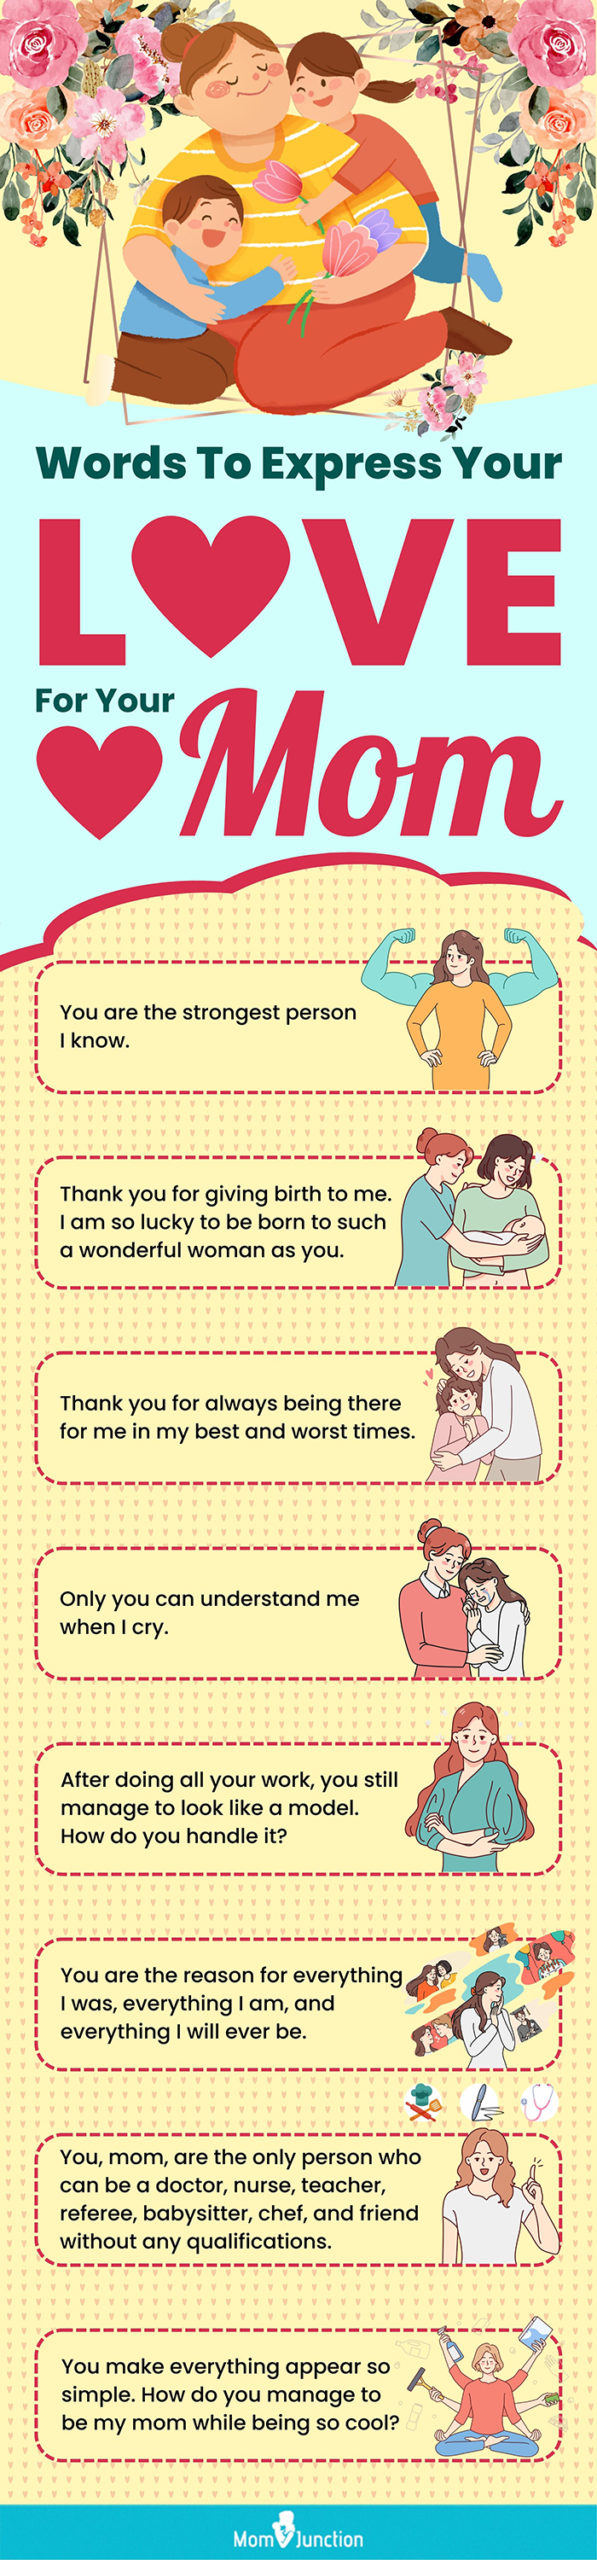 words to express your love for your mom (infographic)